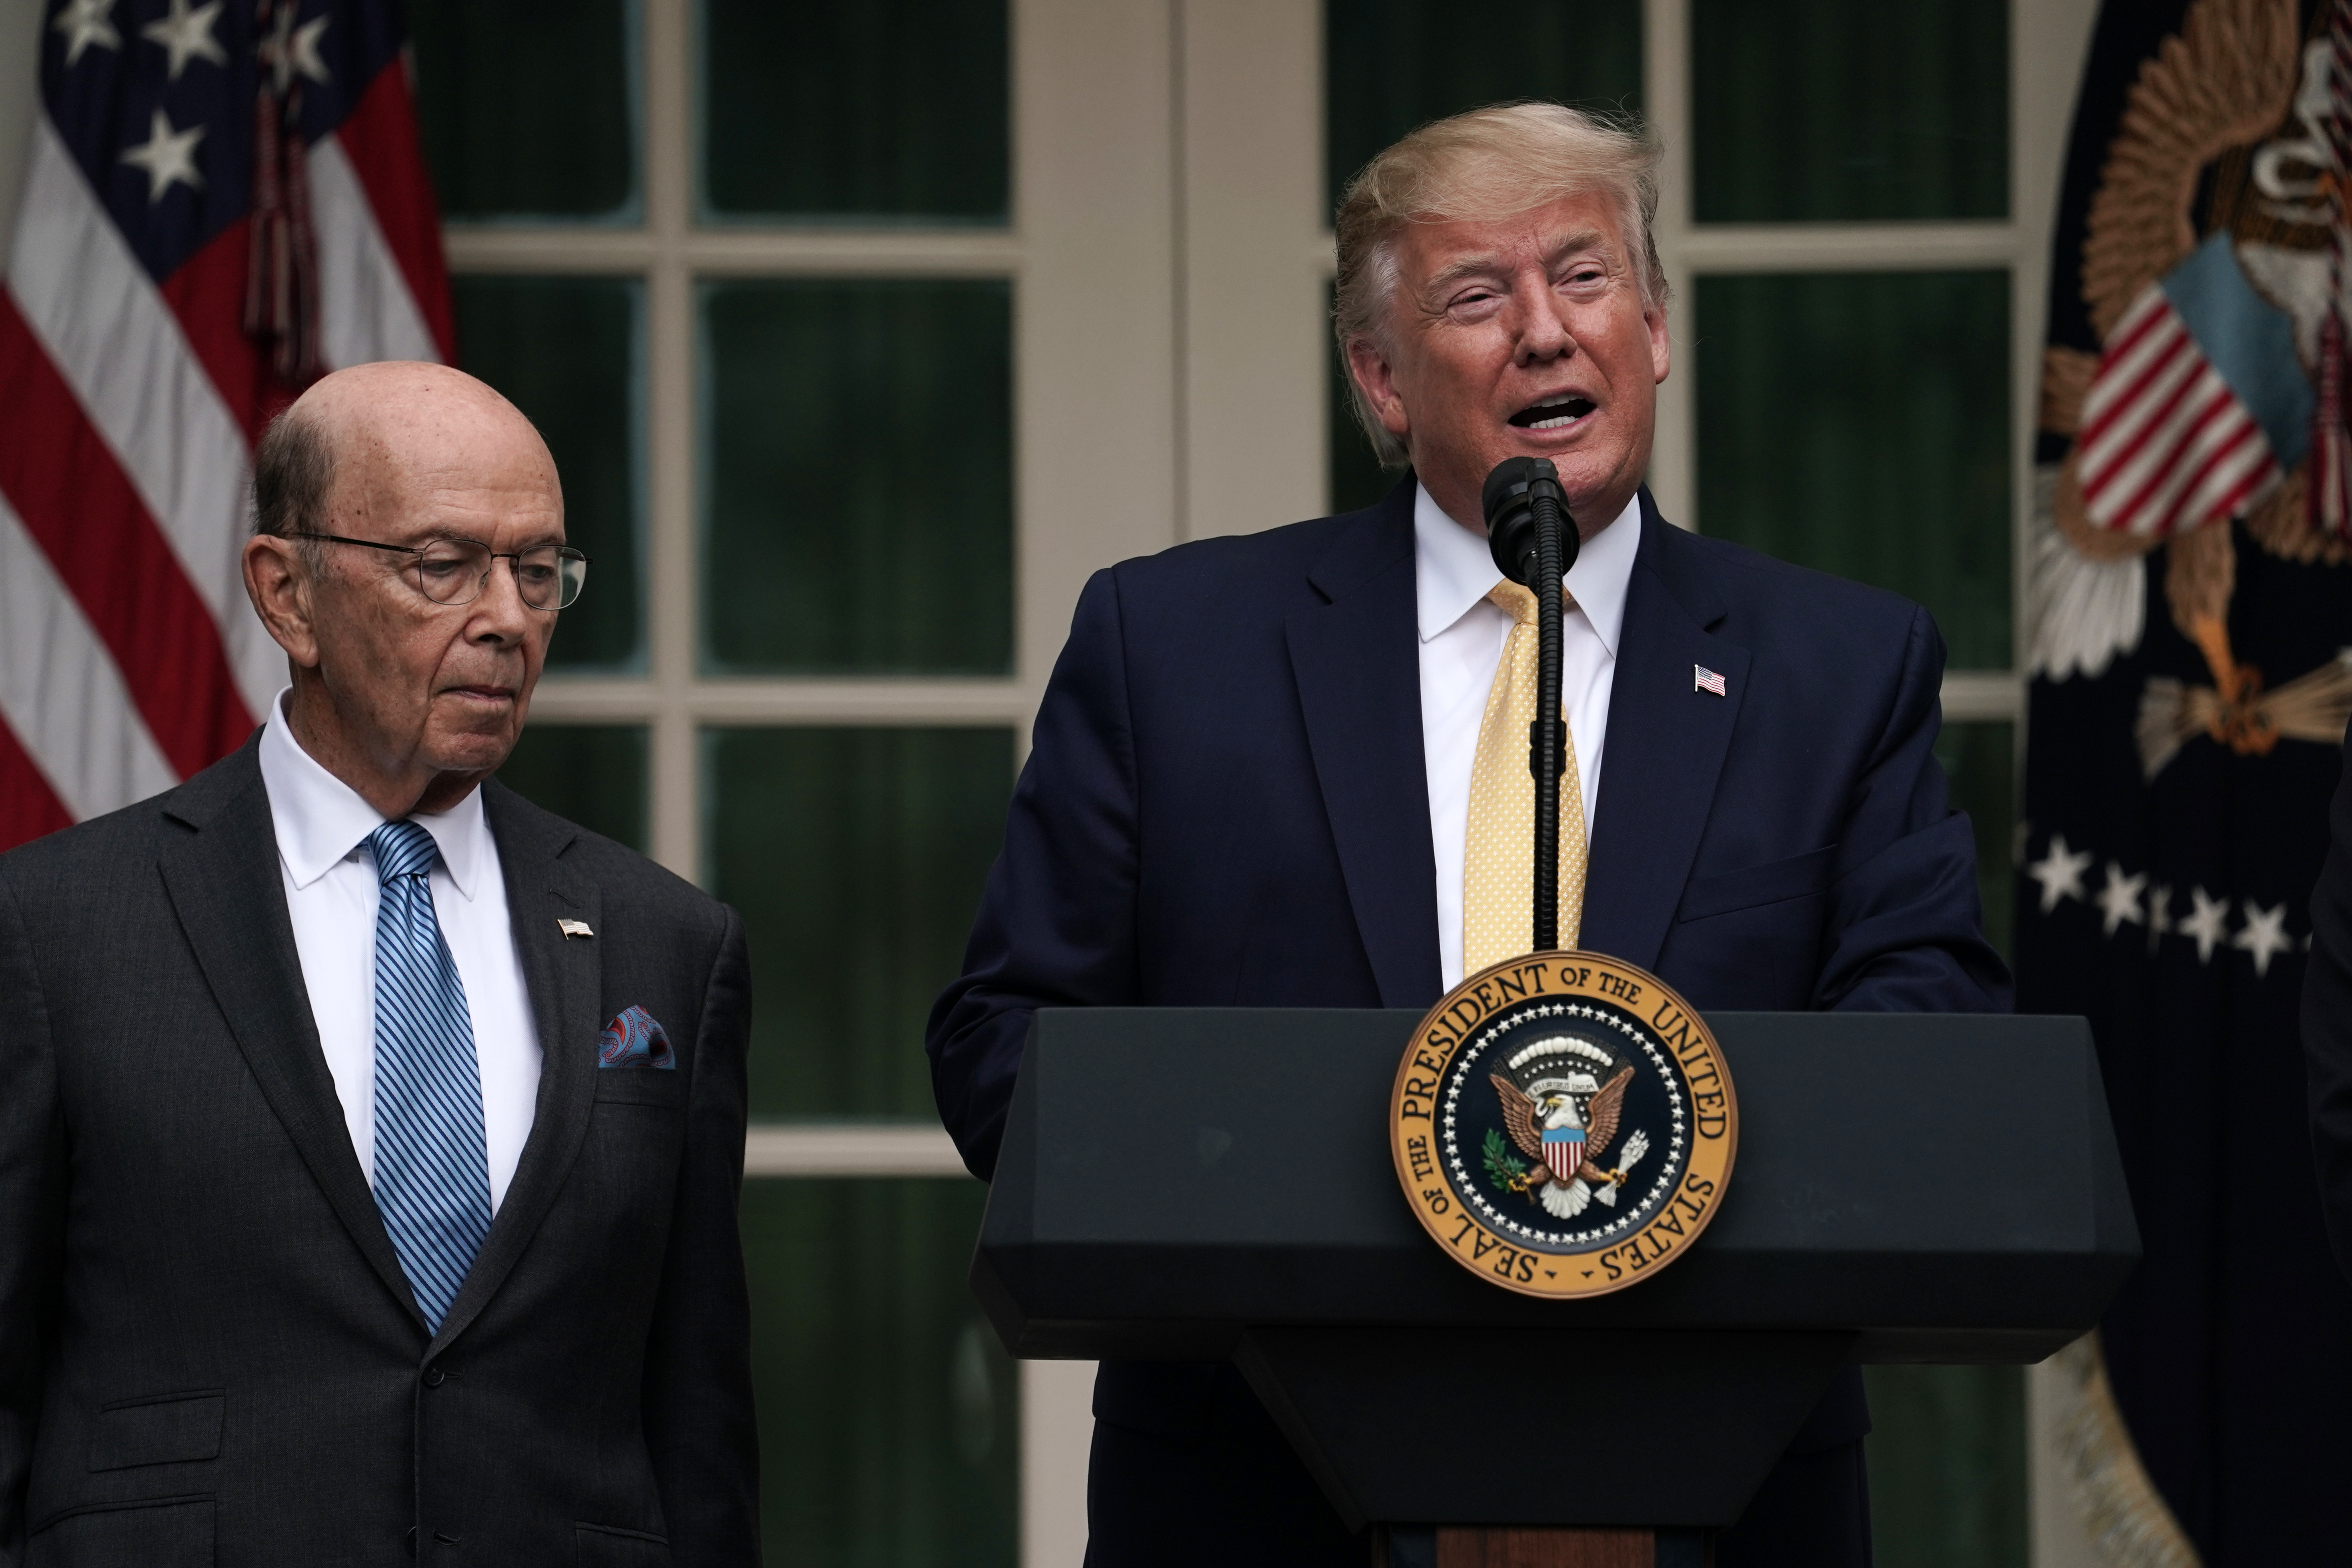 President Donald Trump makes a statement on the census with Secretary of Commerce Wilbur Ross on July 11, 2019. (Alex Wong/Getty Images)